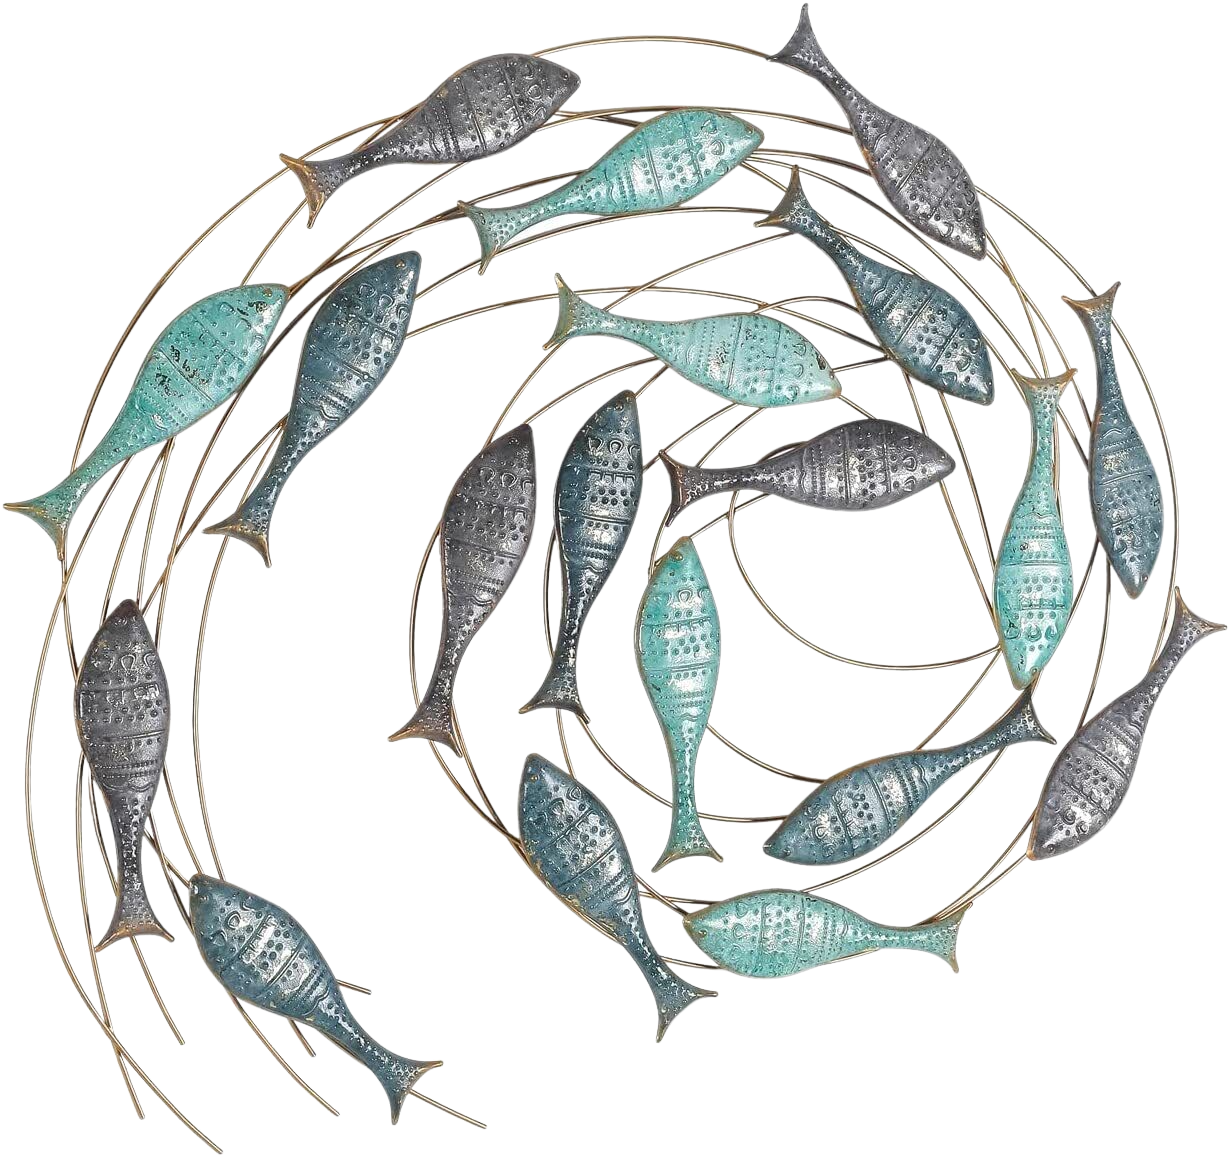 Large School of Fish Decorative Wall Art Sculpture - Home Decor Gifts and More